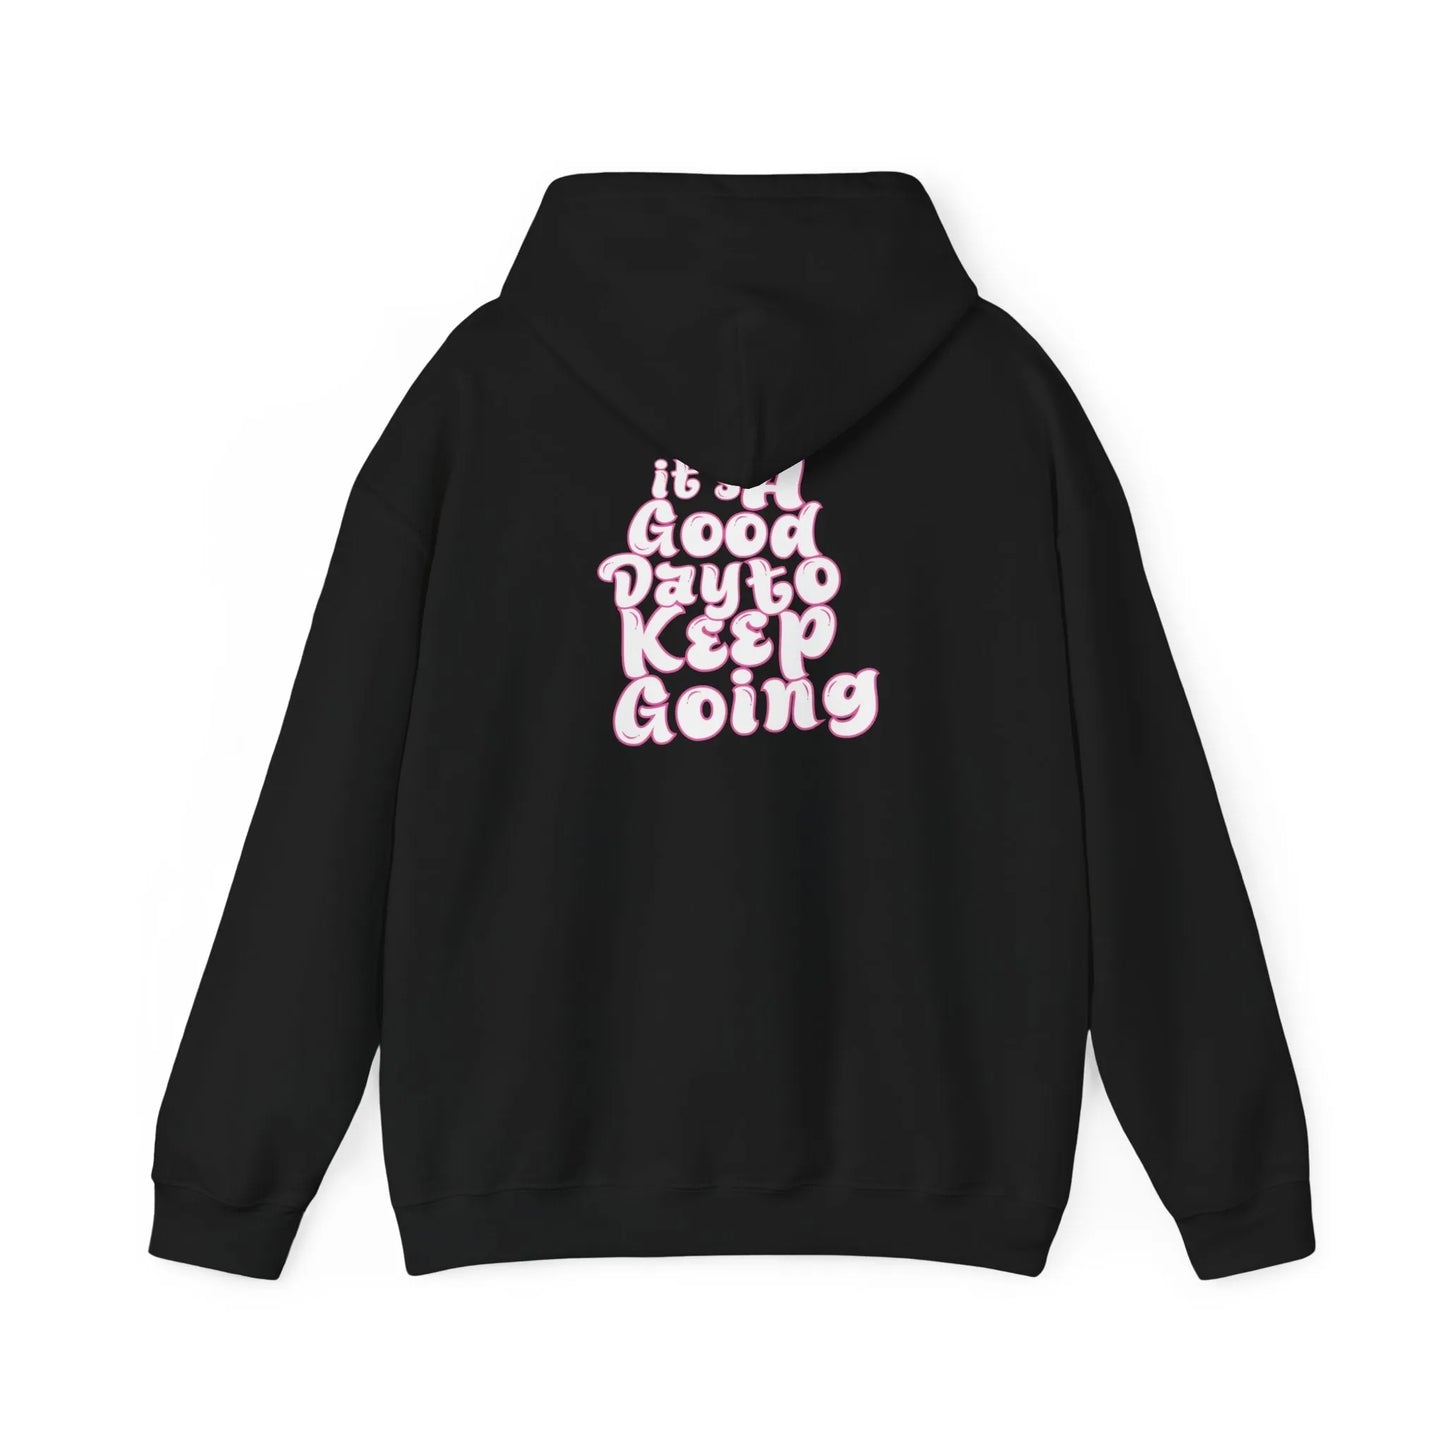 It's A Good Day To Keep Going Hoodie Pink Black Back